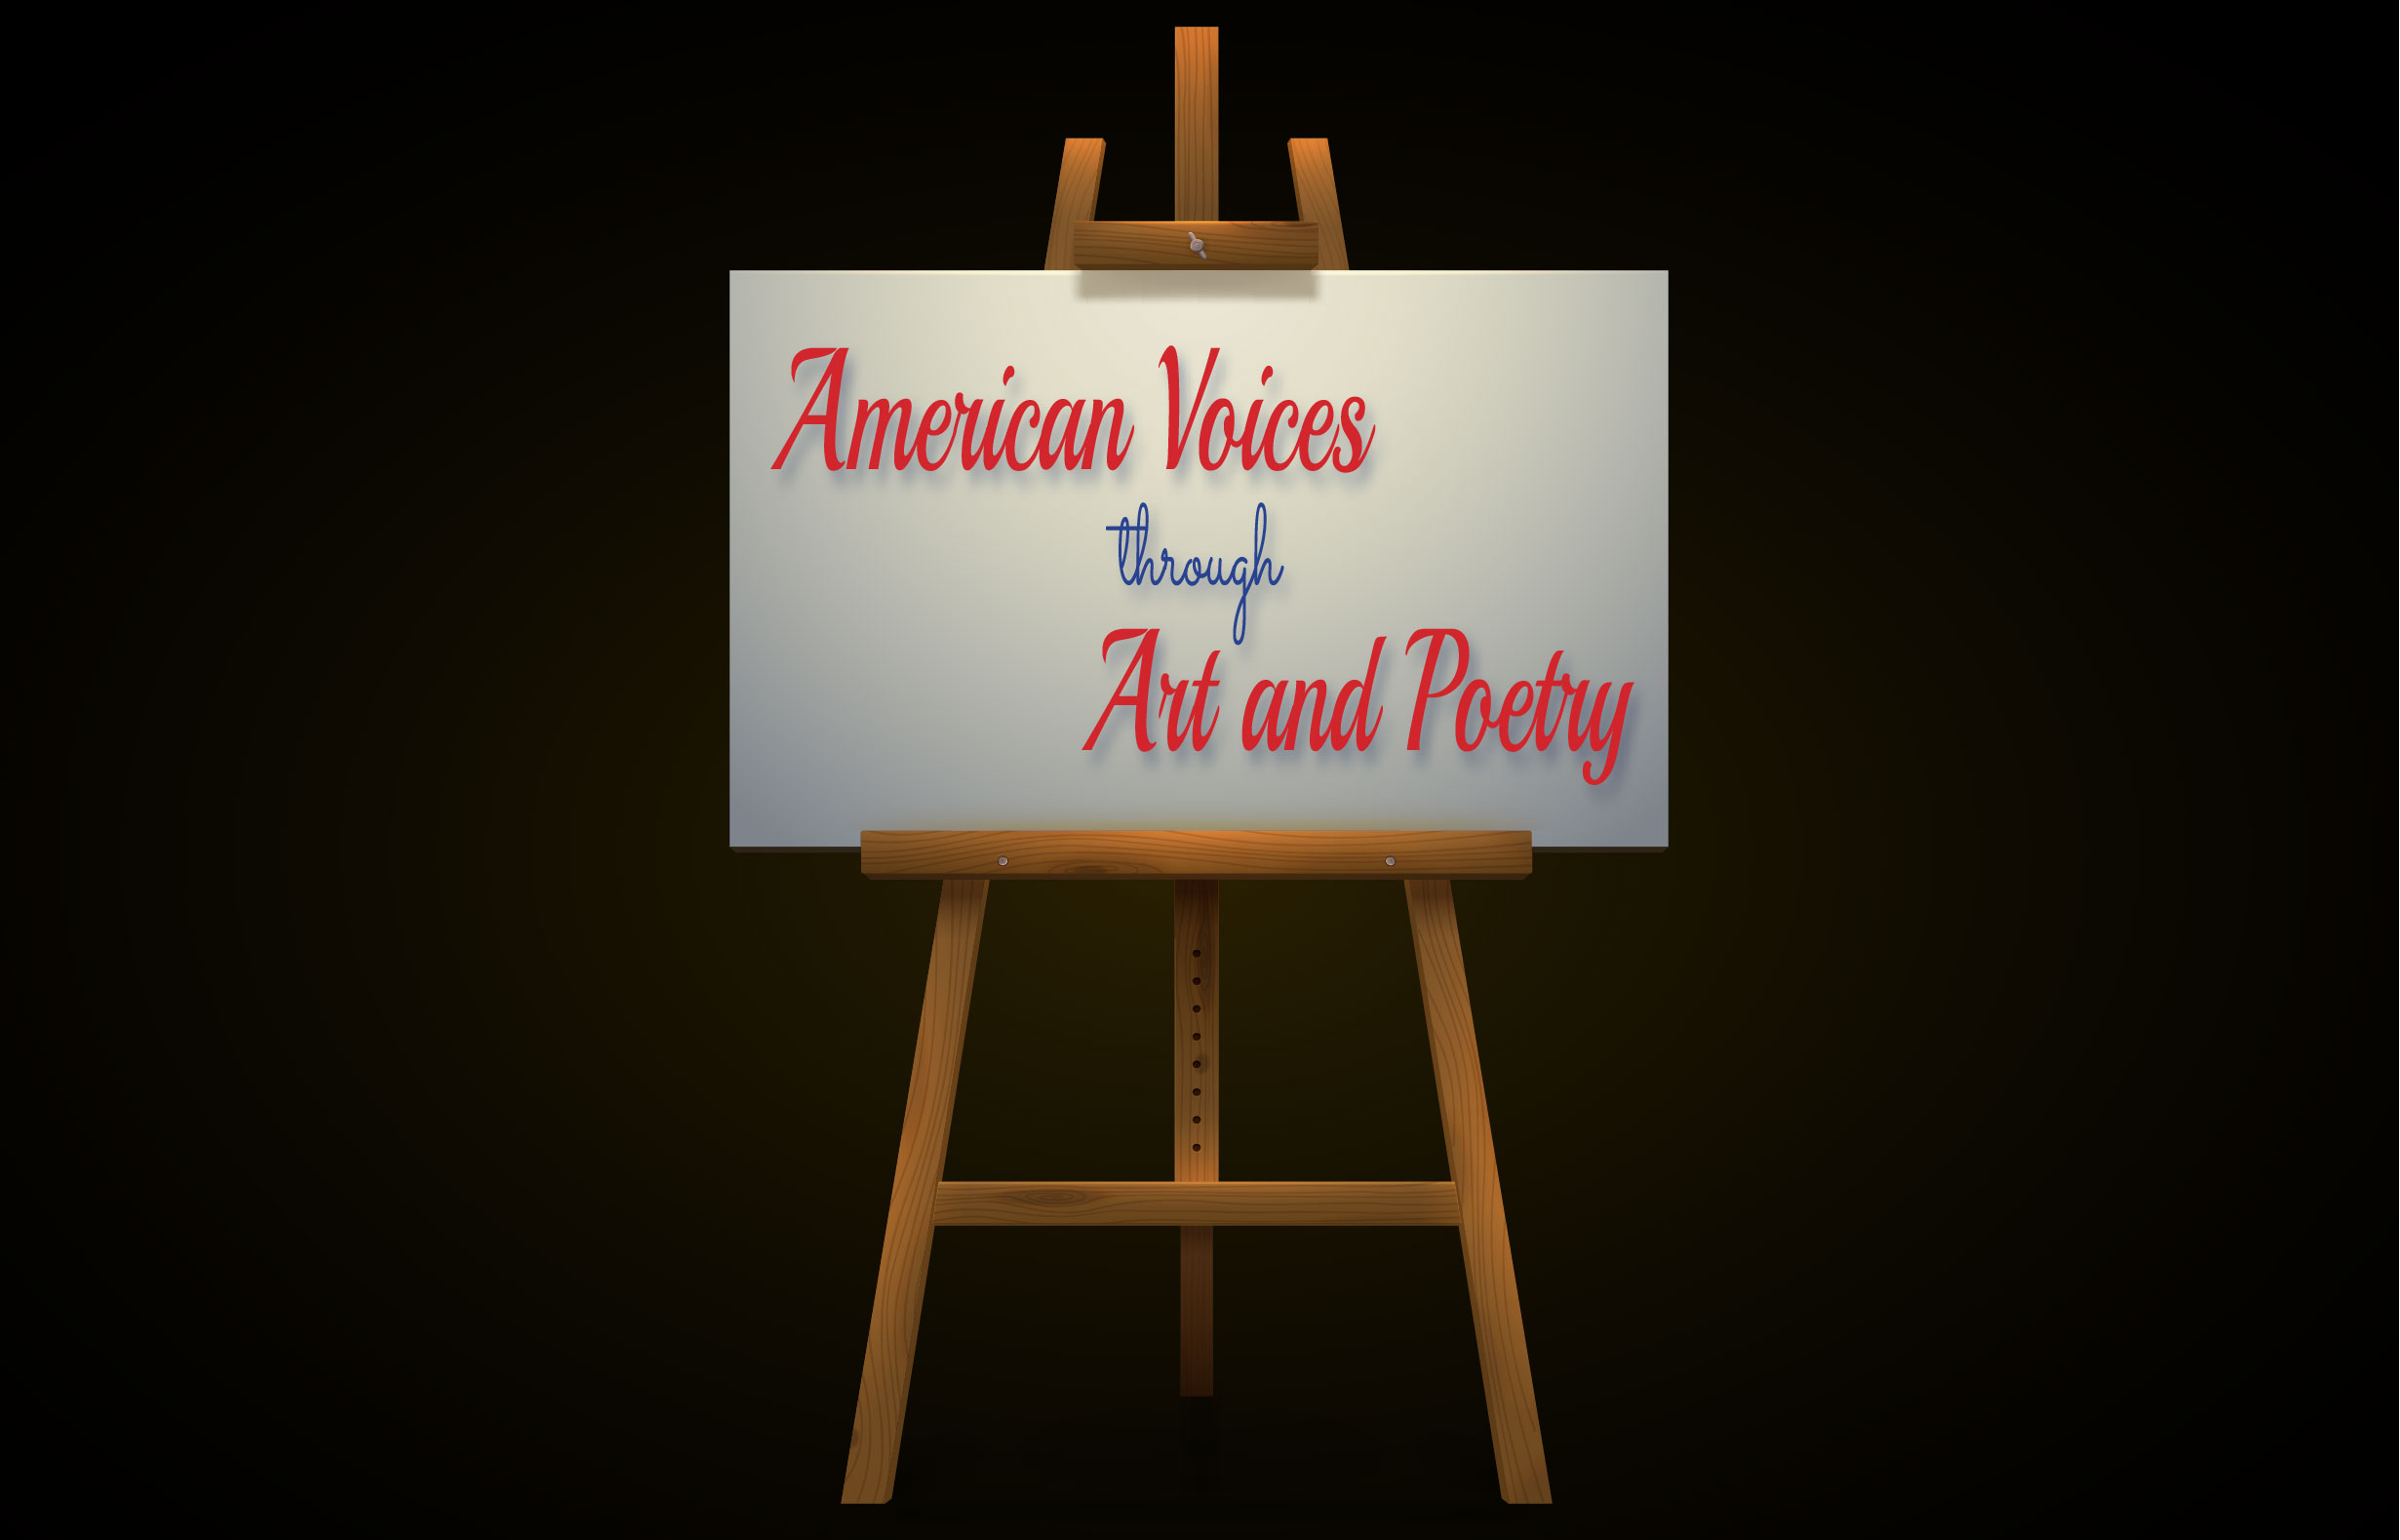 American Voices through Art and Poetry